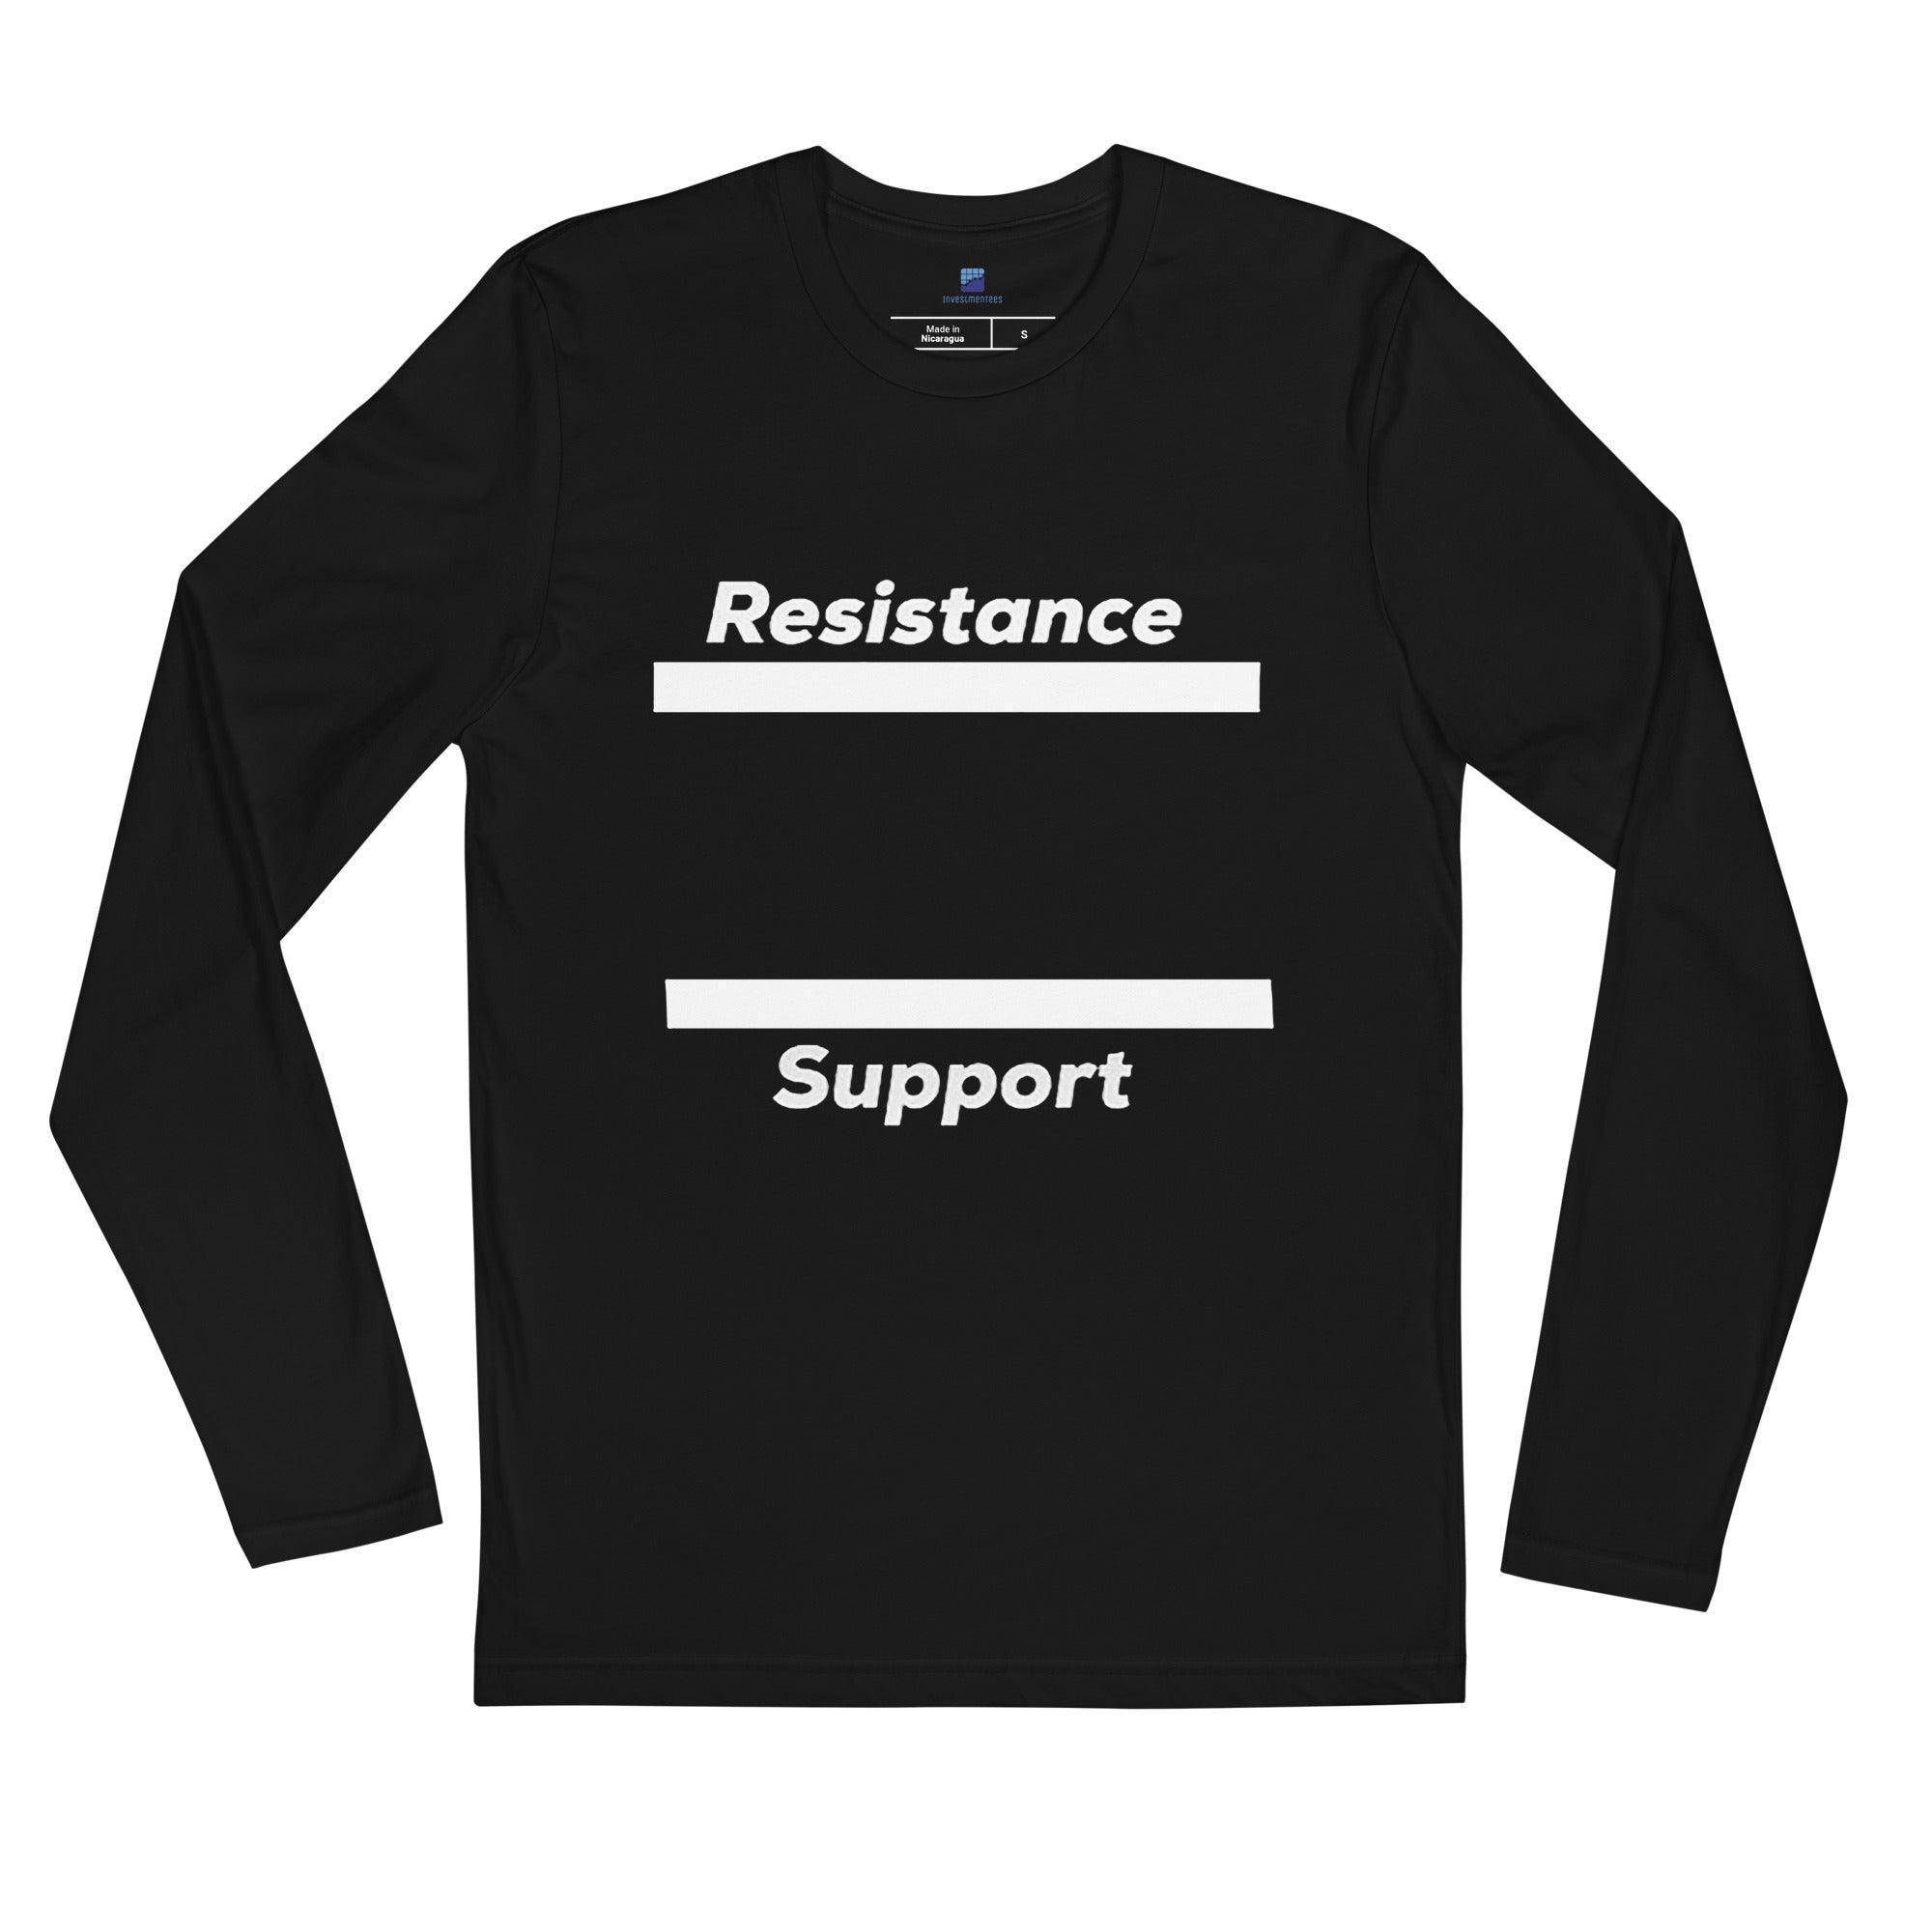 Support & Resistance Long Sleeve T-Shirt - InvestmenTees